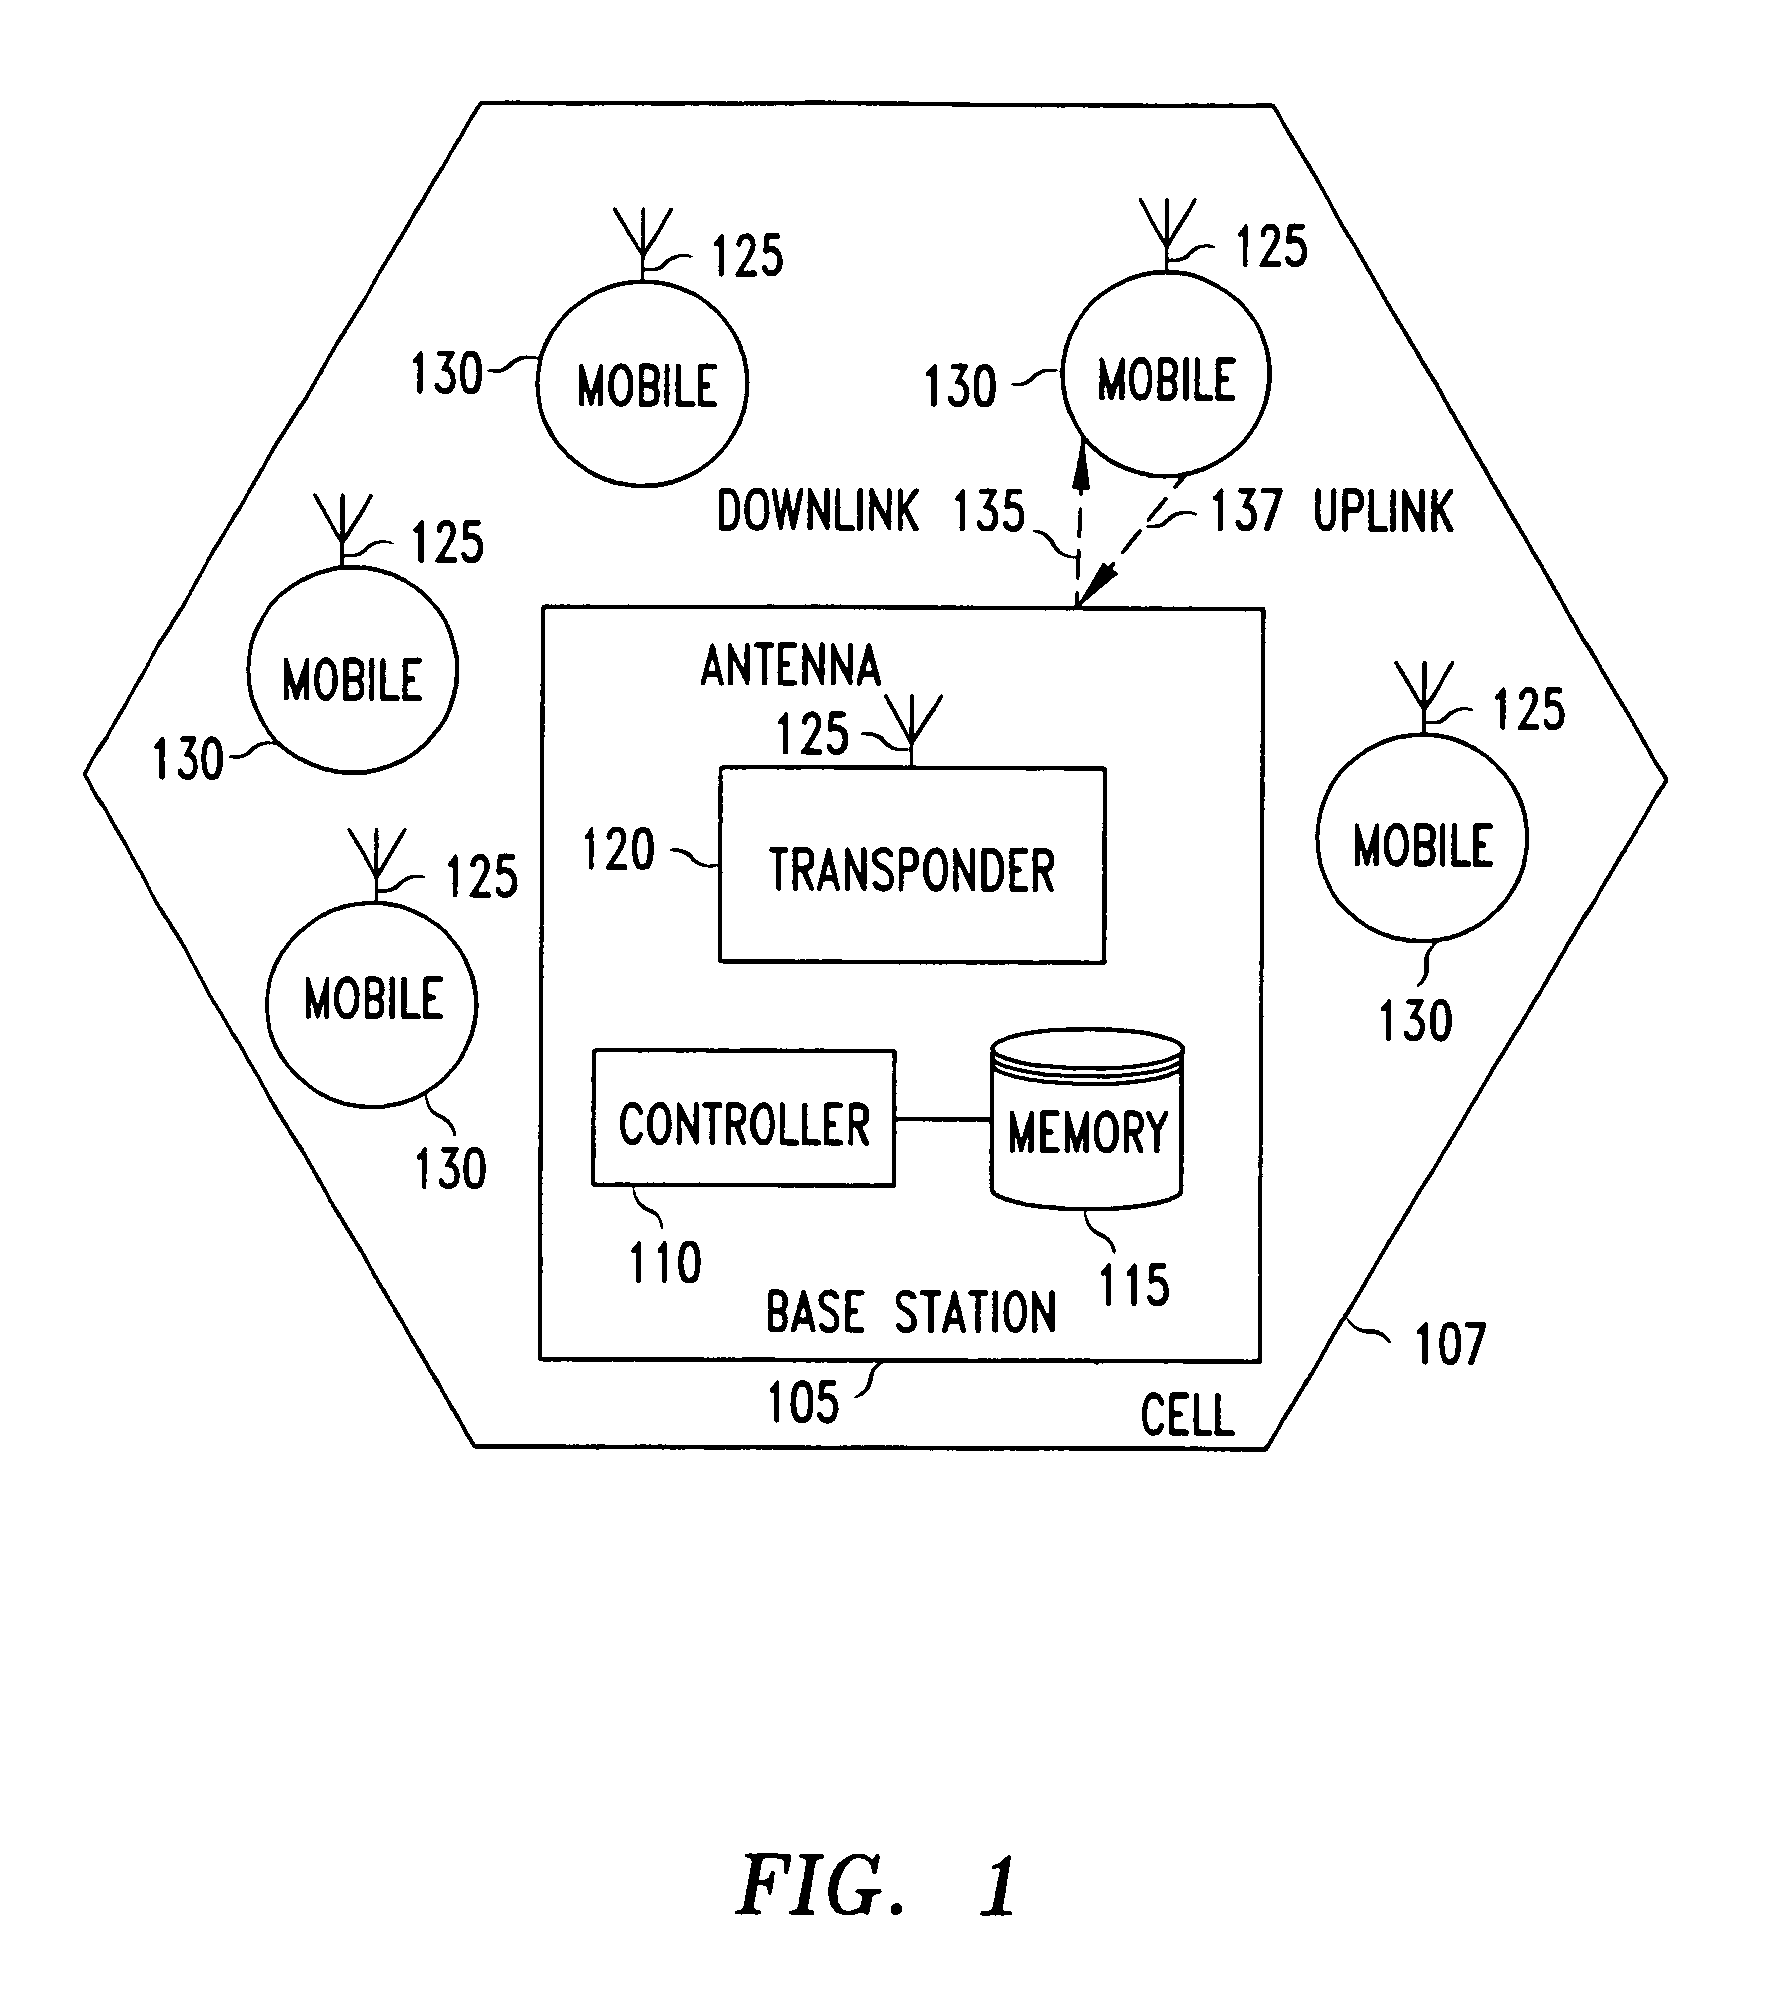 Method and system for integrated link adaptation and power control to improve error and throughput performance in wireless packet networks